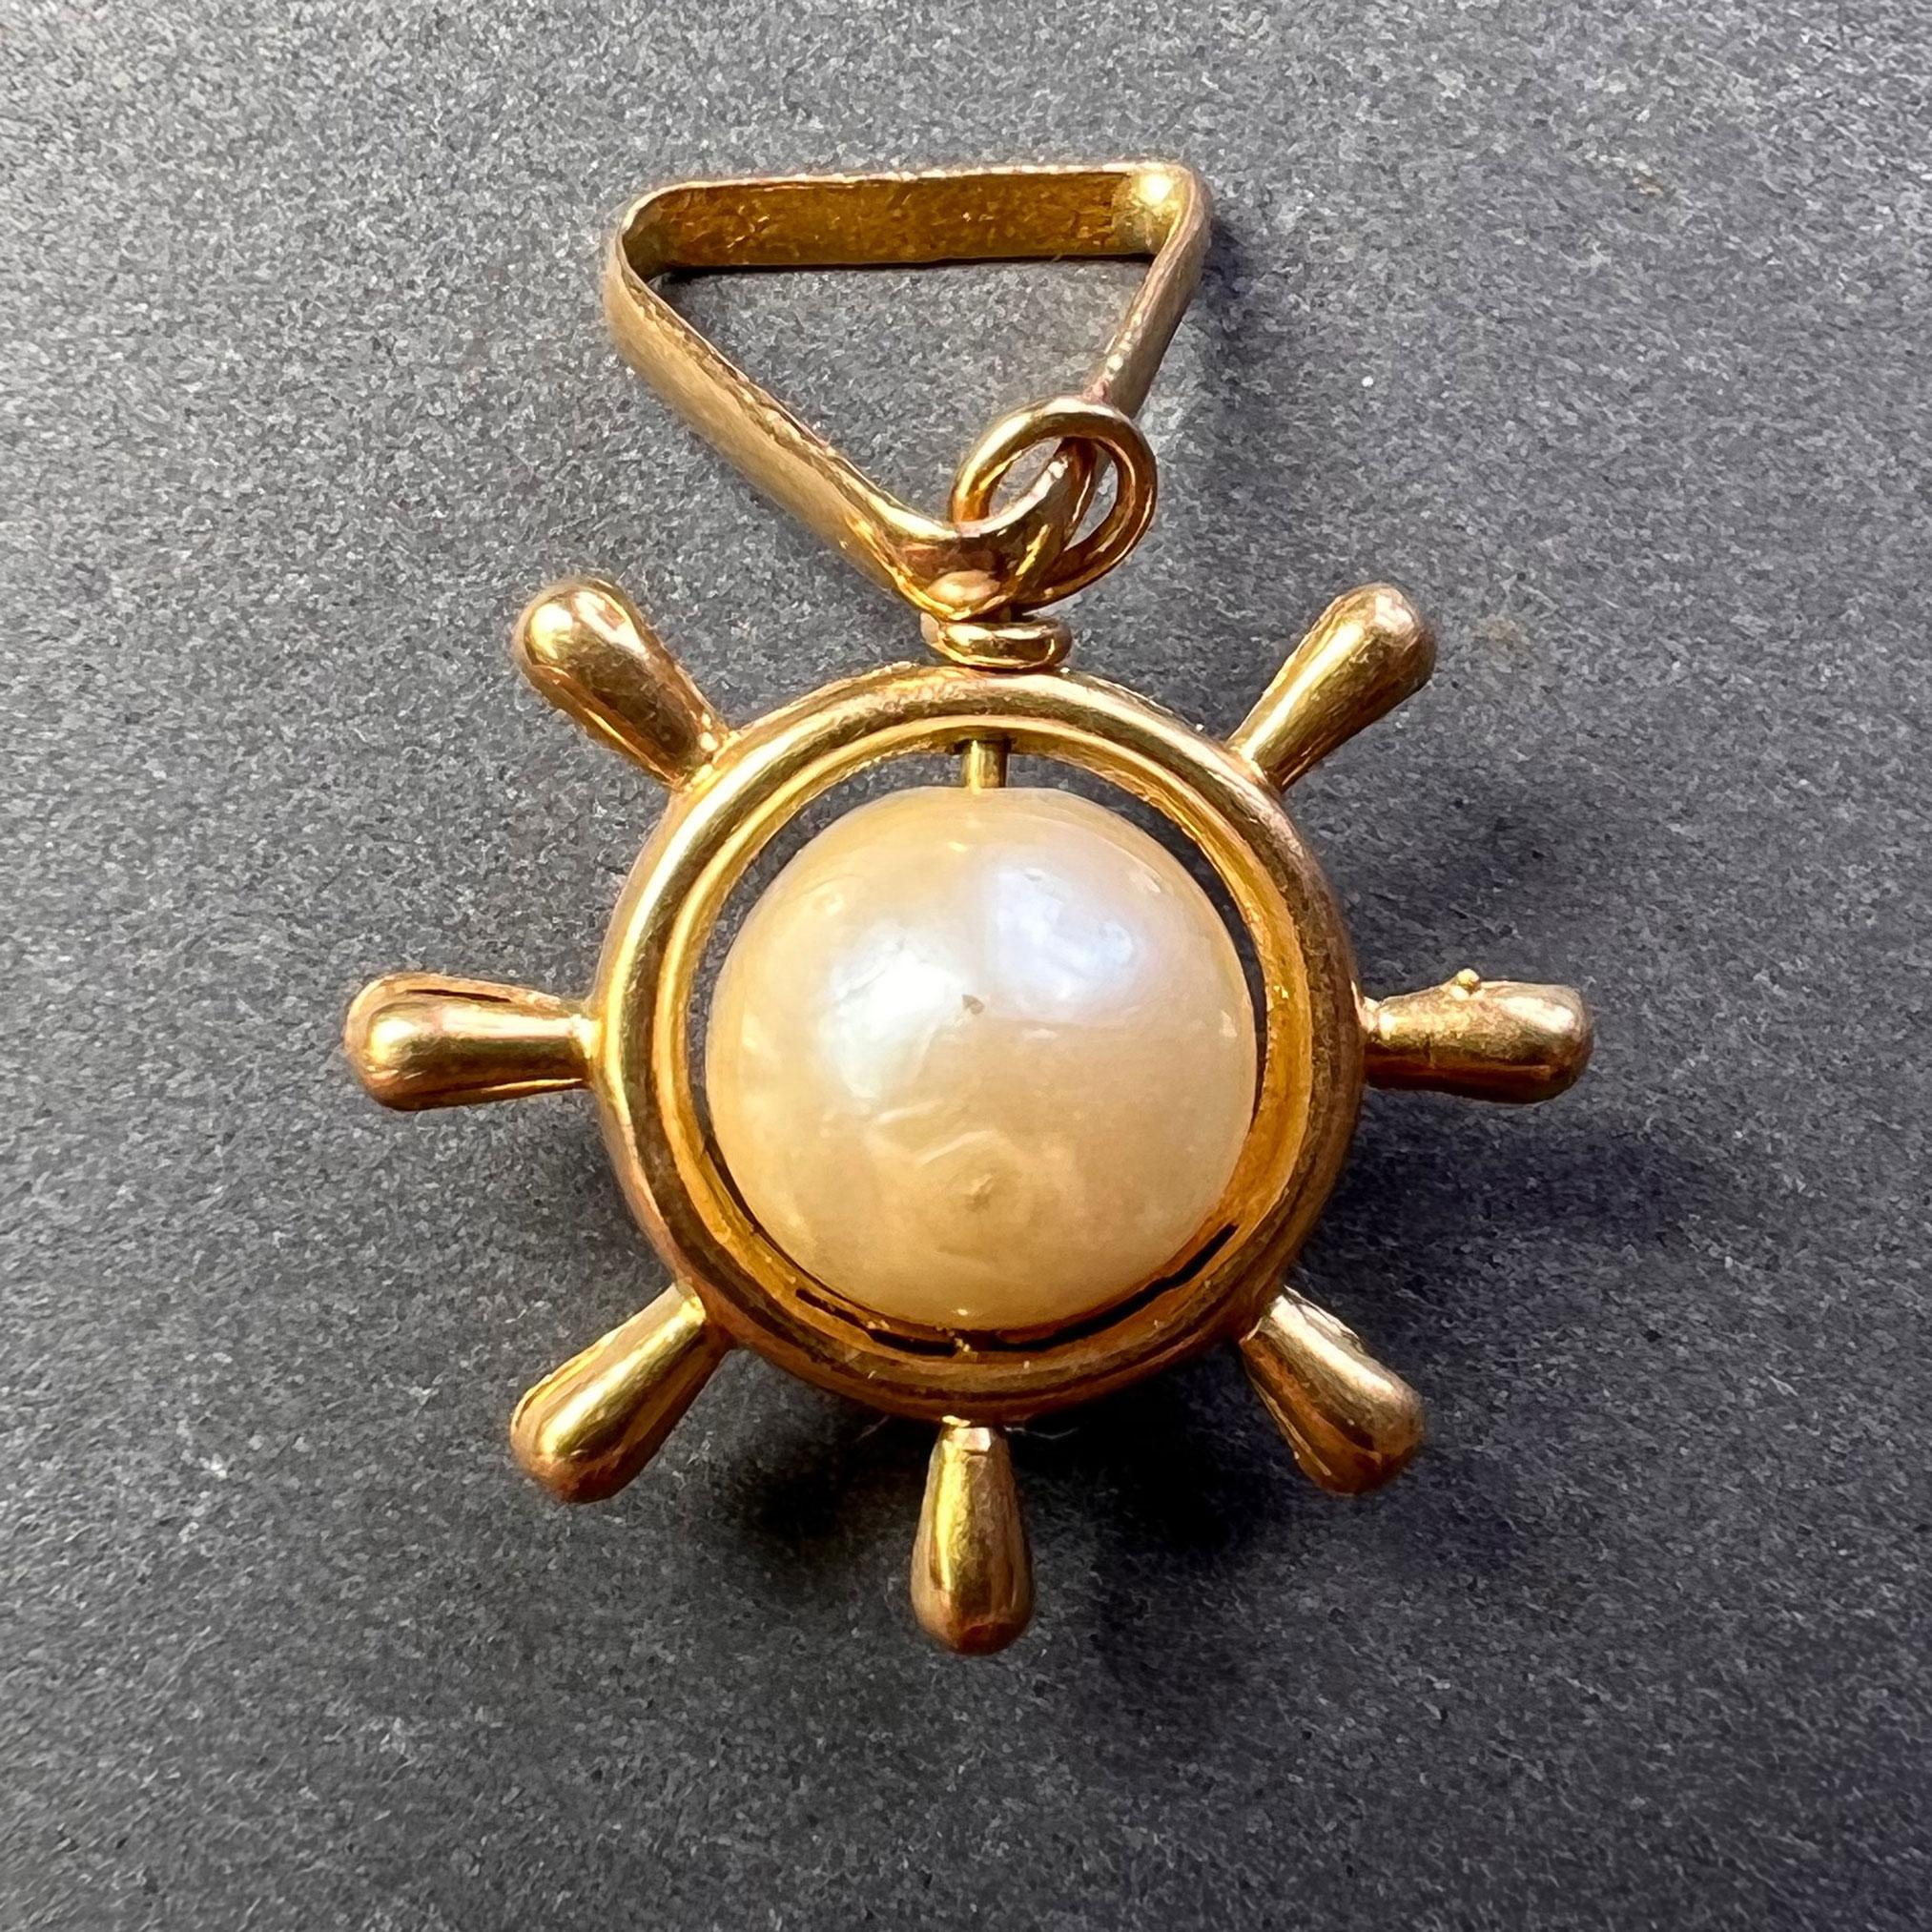 An 18 karat (18K) yellow gold charm pendant designed as a ships steering wheel centering a white cultured pearl. Unmarked but tested as 18 karat gold.
 
Dimensions: 1.7 x 1.7 x 0.75 cm (not including jump ring)
Weight: 1.75 grams
(Chain not included)